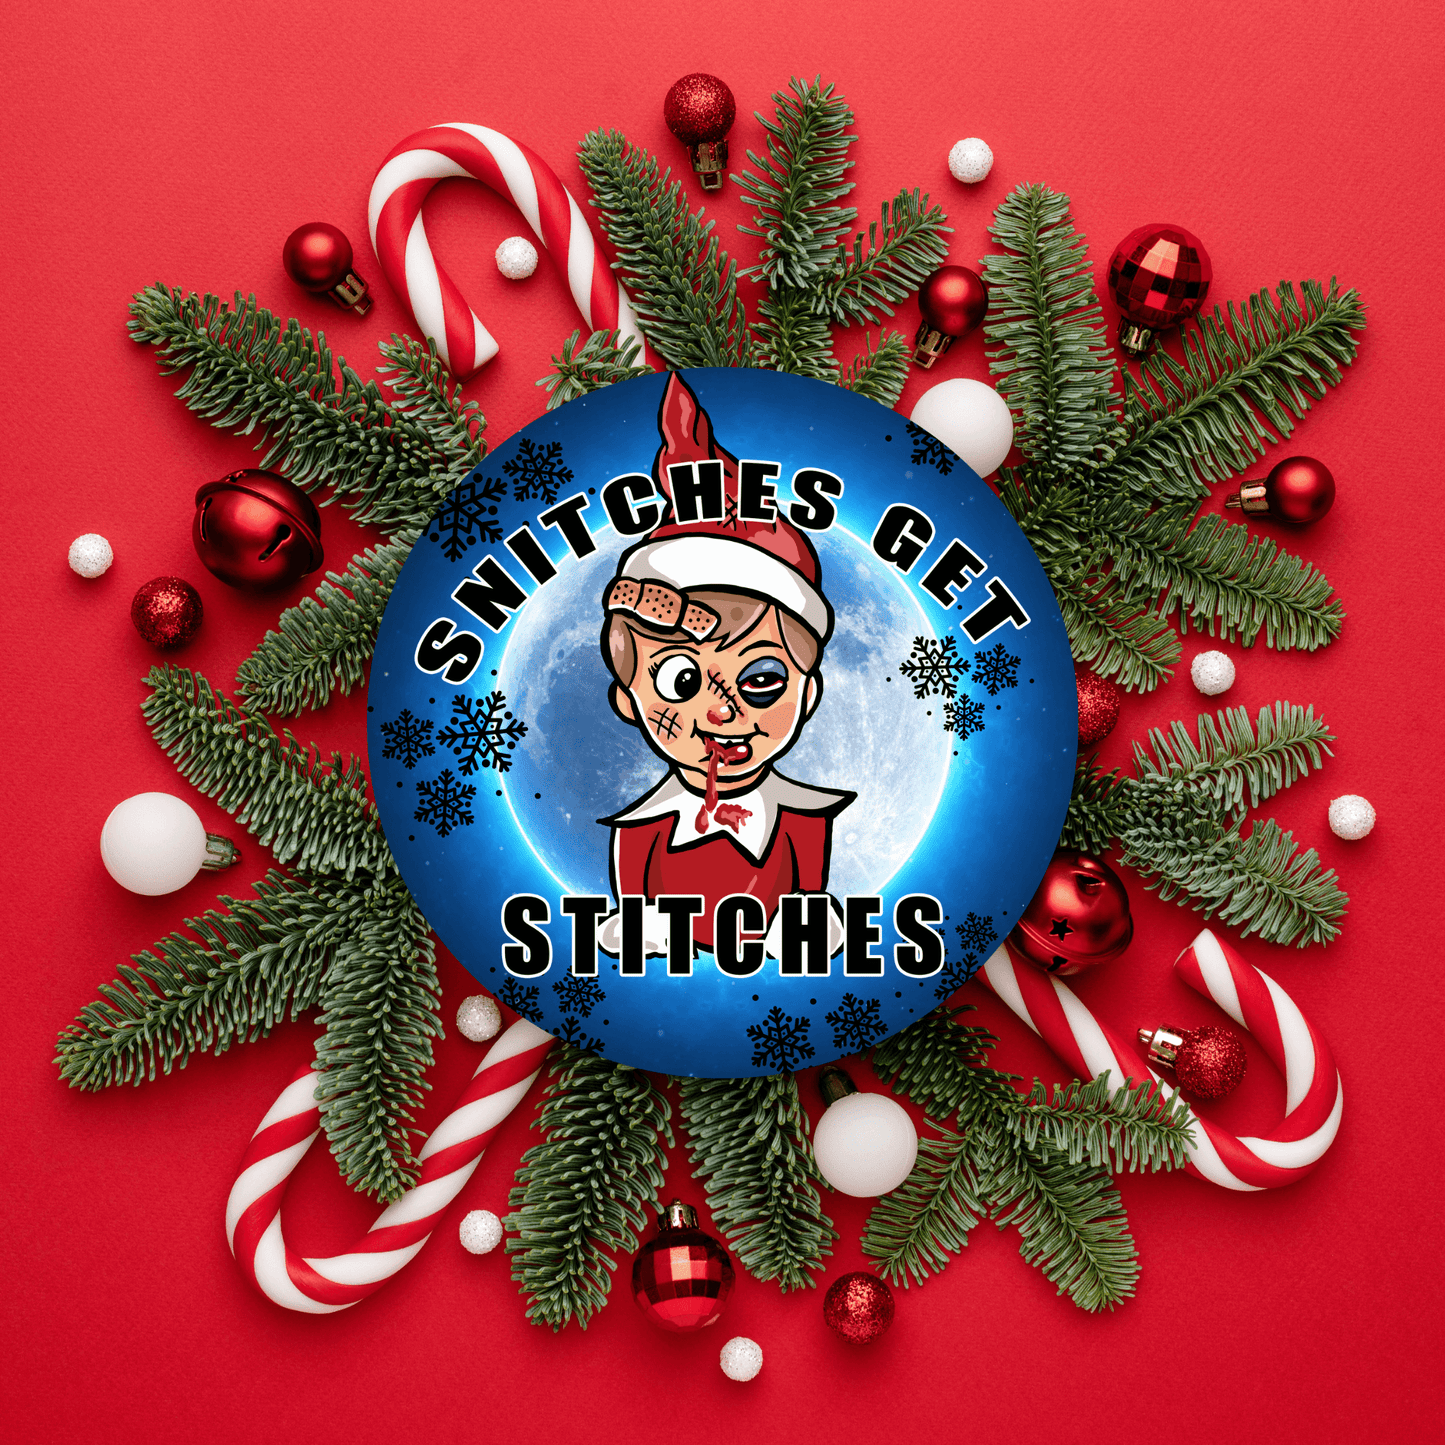 Snitches Get Stitches Funny Christmas Ornament 3